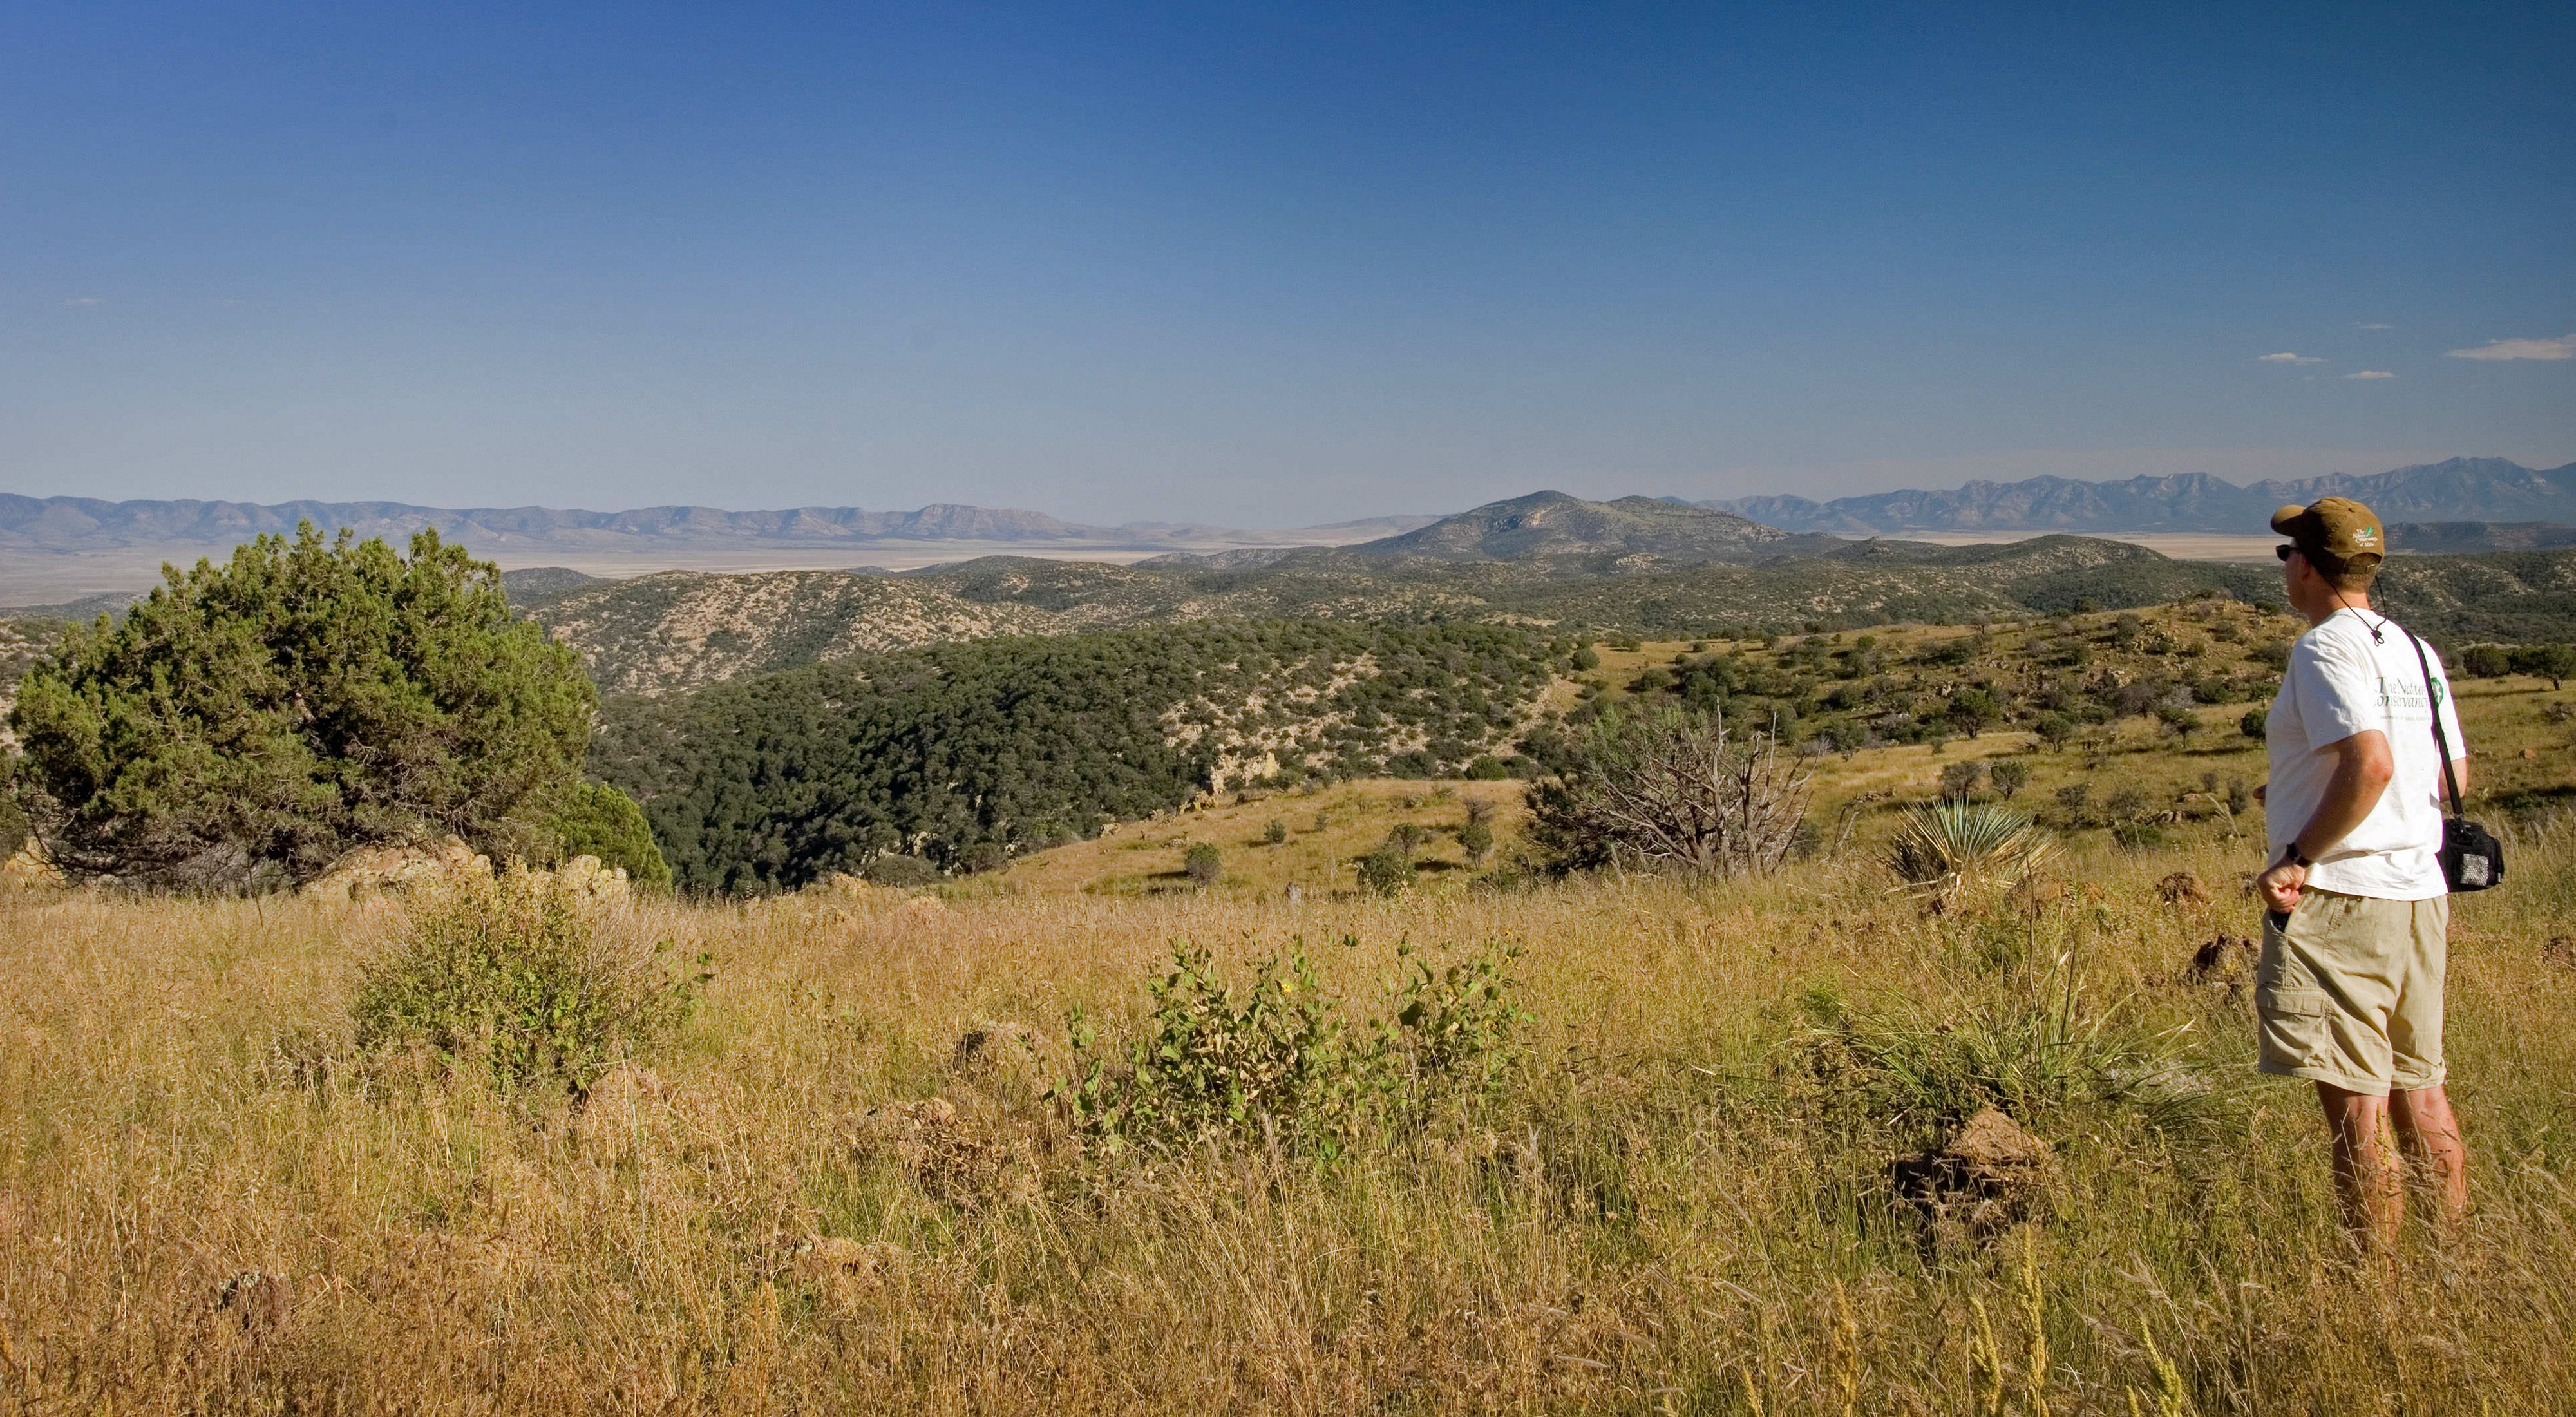 in New Mexico, part of the Malpai borderland area, from the high elevation of the Coronado National Forest.